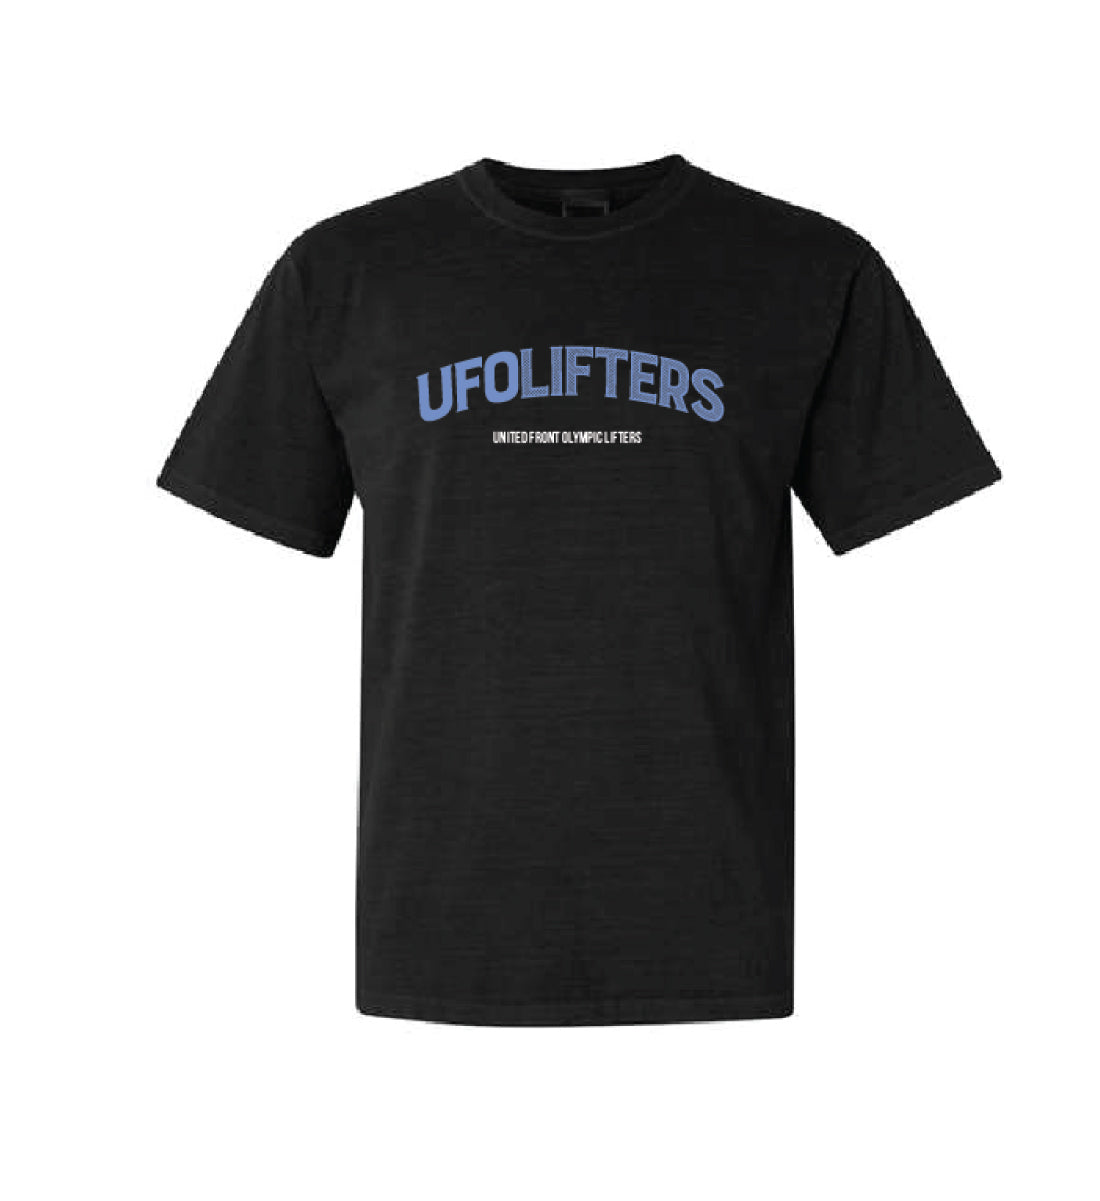 UFO Lifters 60/40 cotton/polyester